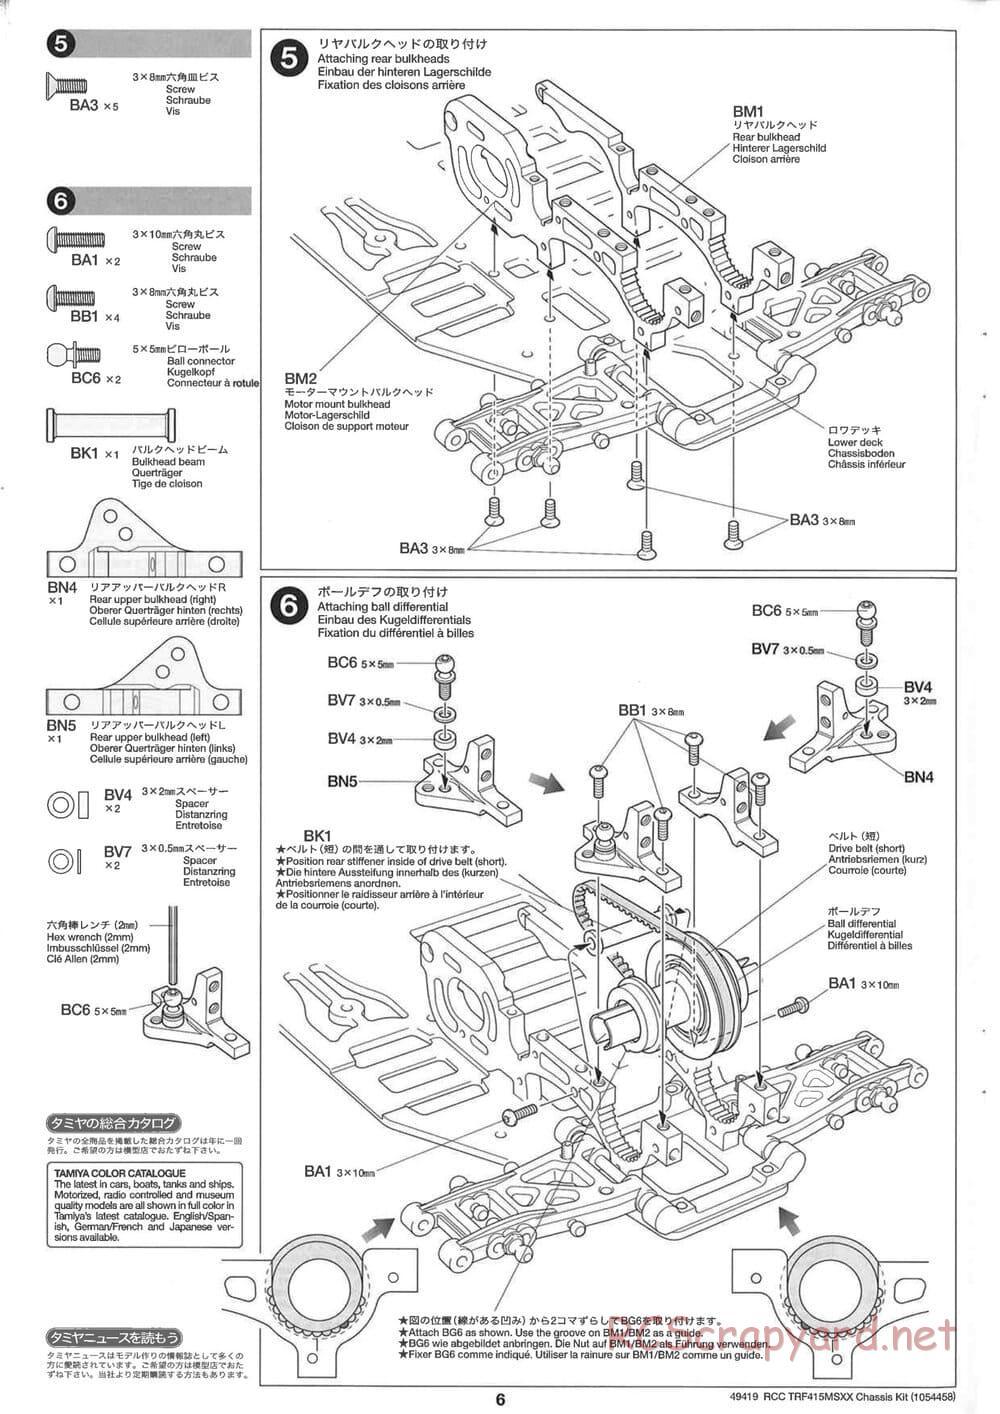 Tamiya - TRF415-MSXX Chassis - Manual - Page 6